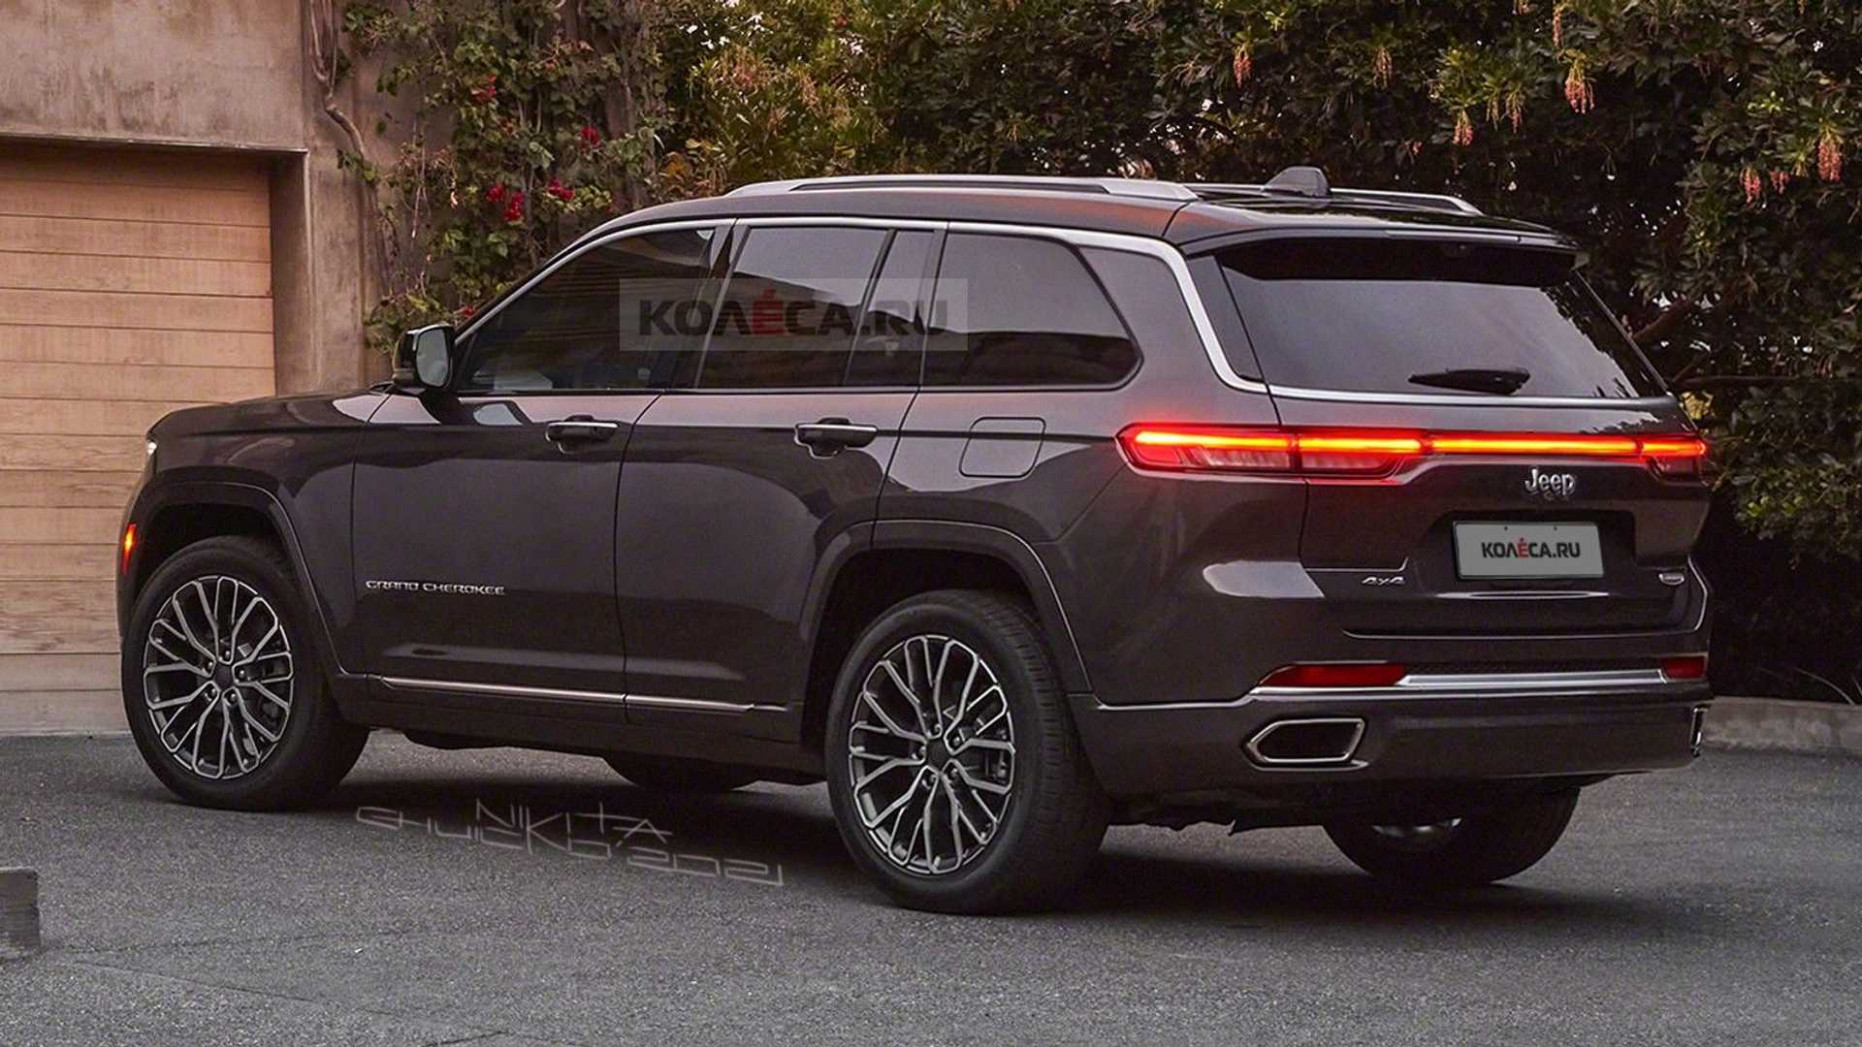 Redesign and Concept 2022 jeep grand cherokee 5 seat